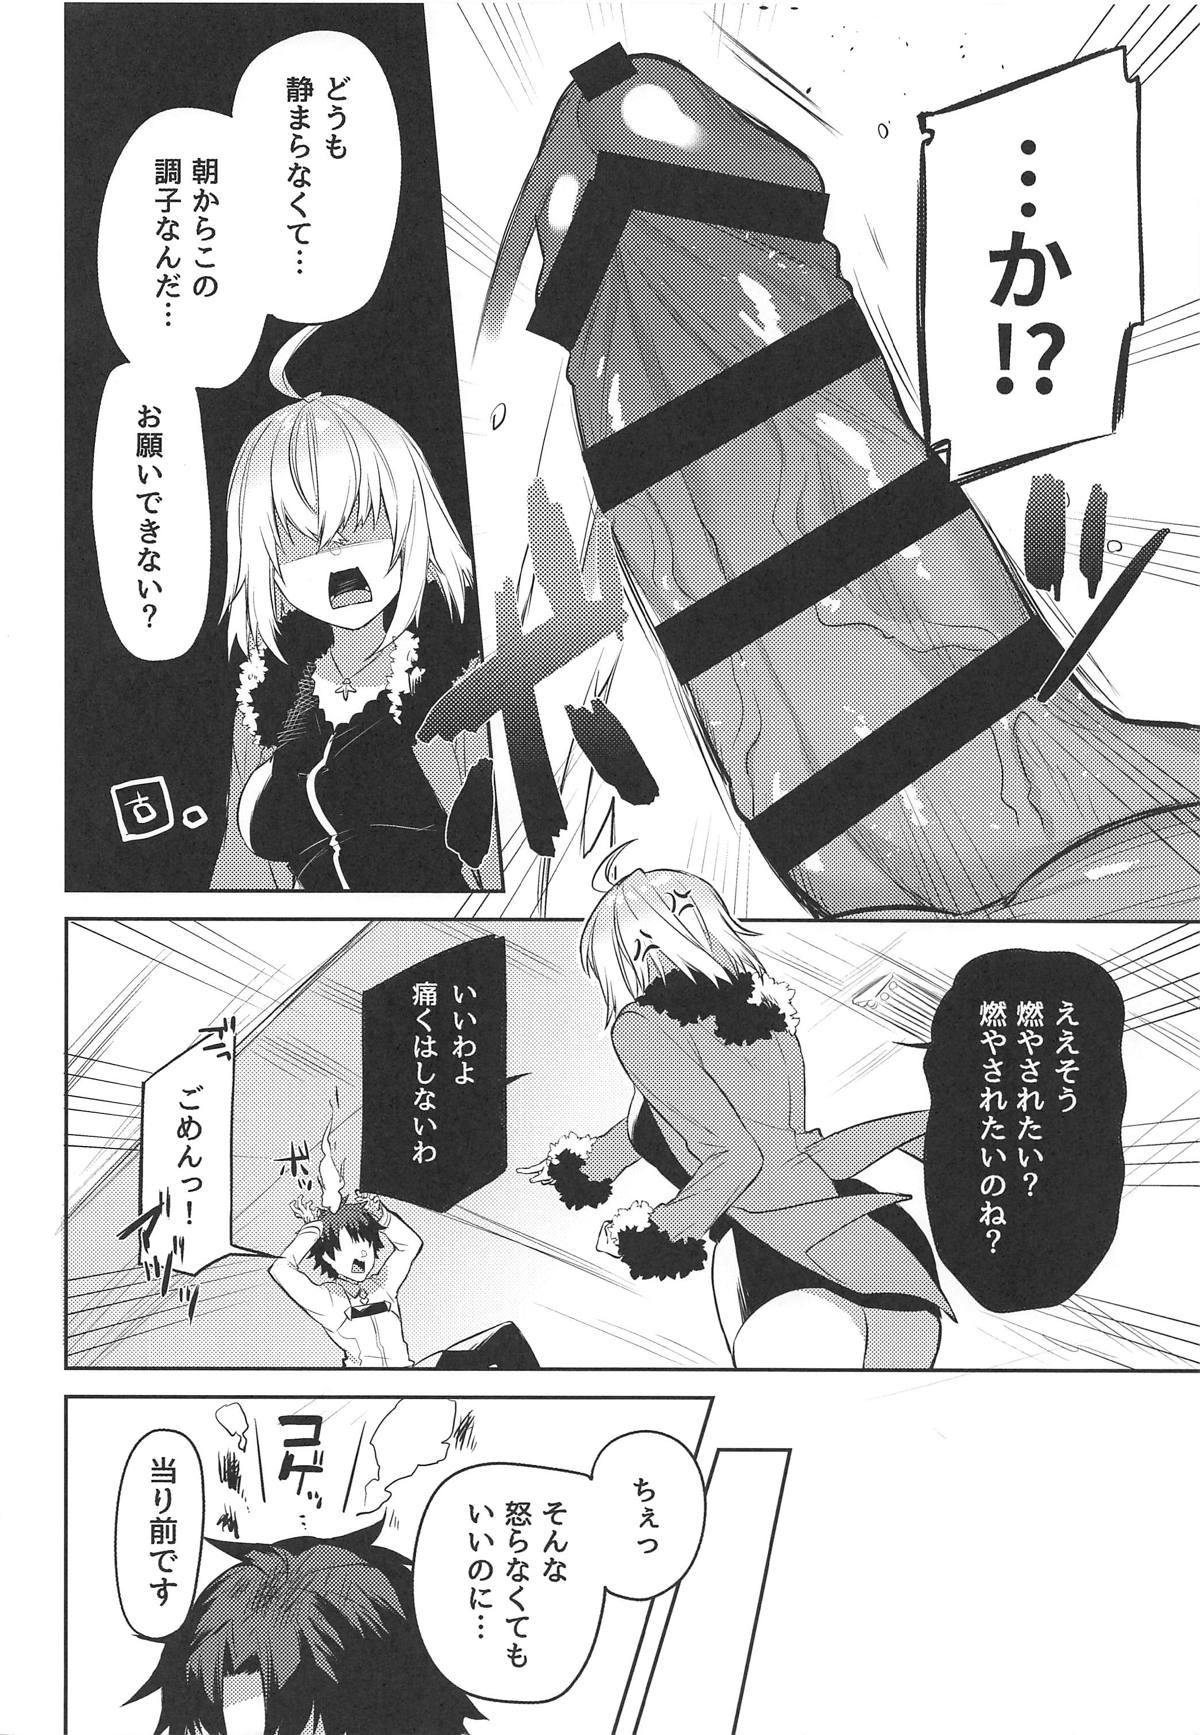 Pinoy Shinjuku Sneaking Mission - Fate grand order Weird - Page 3